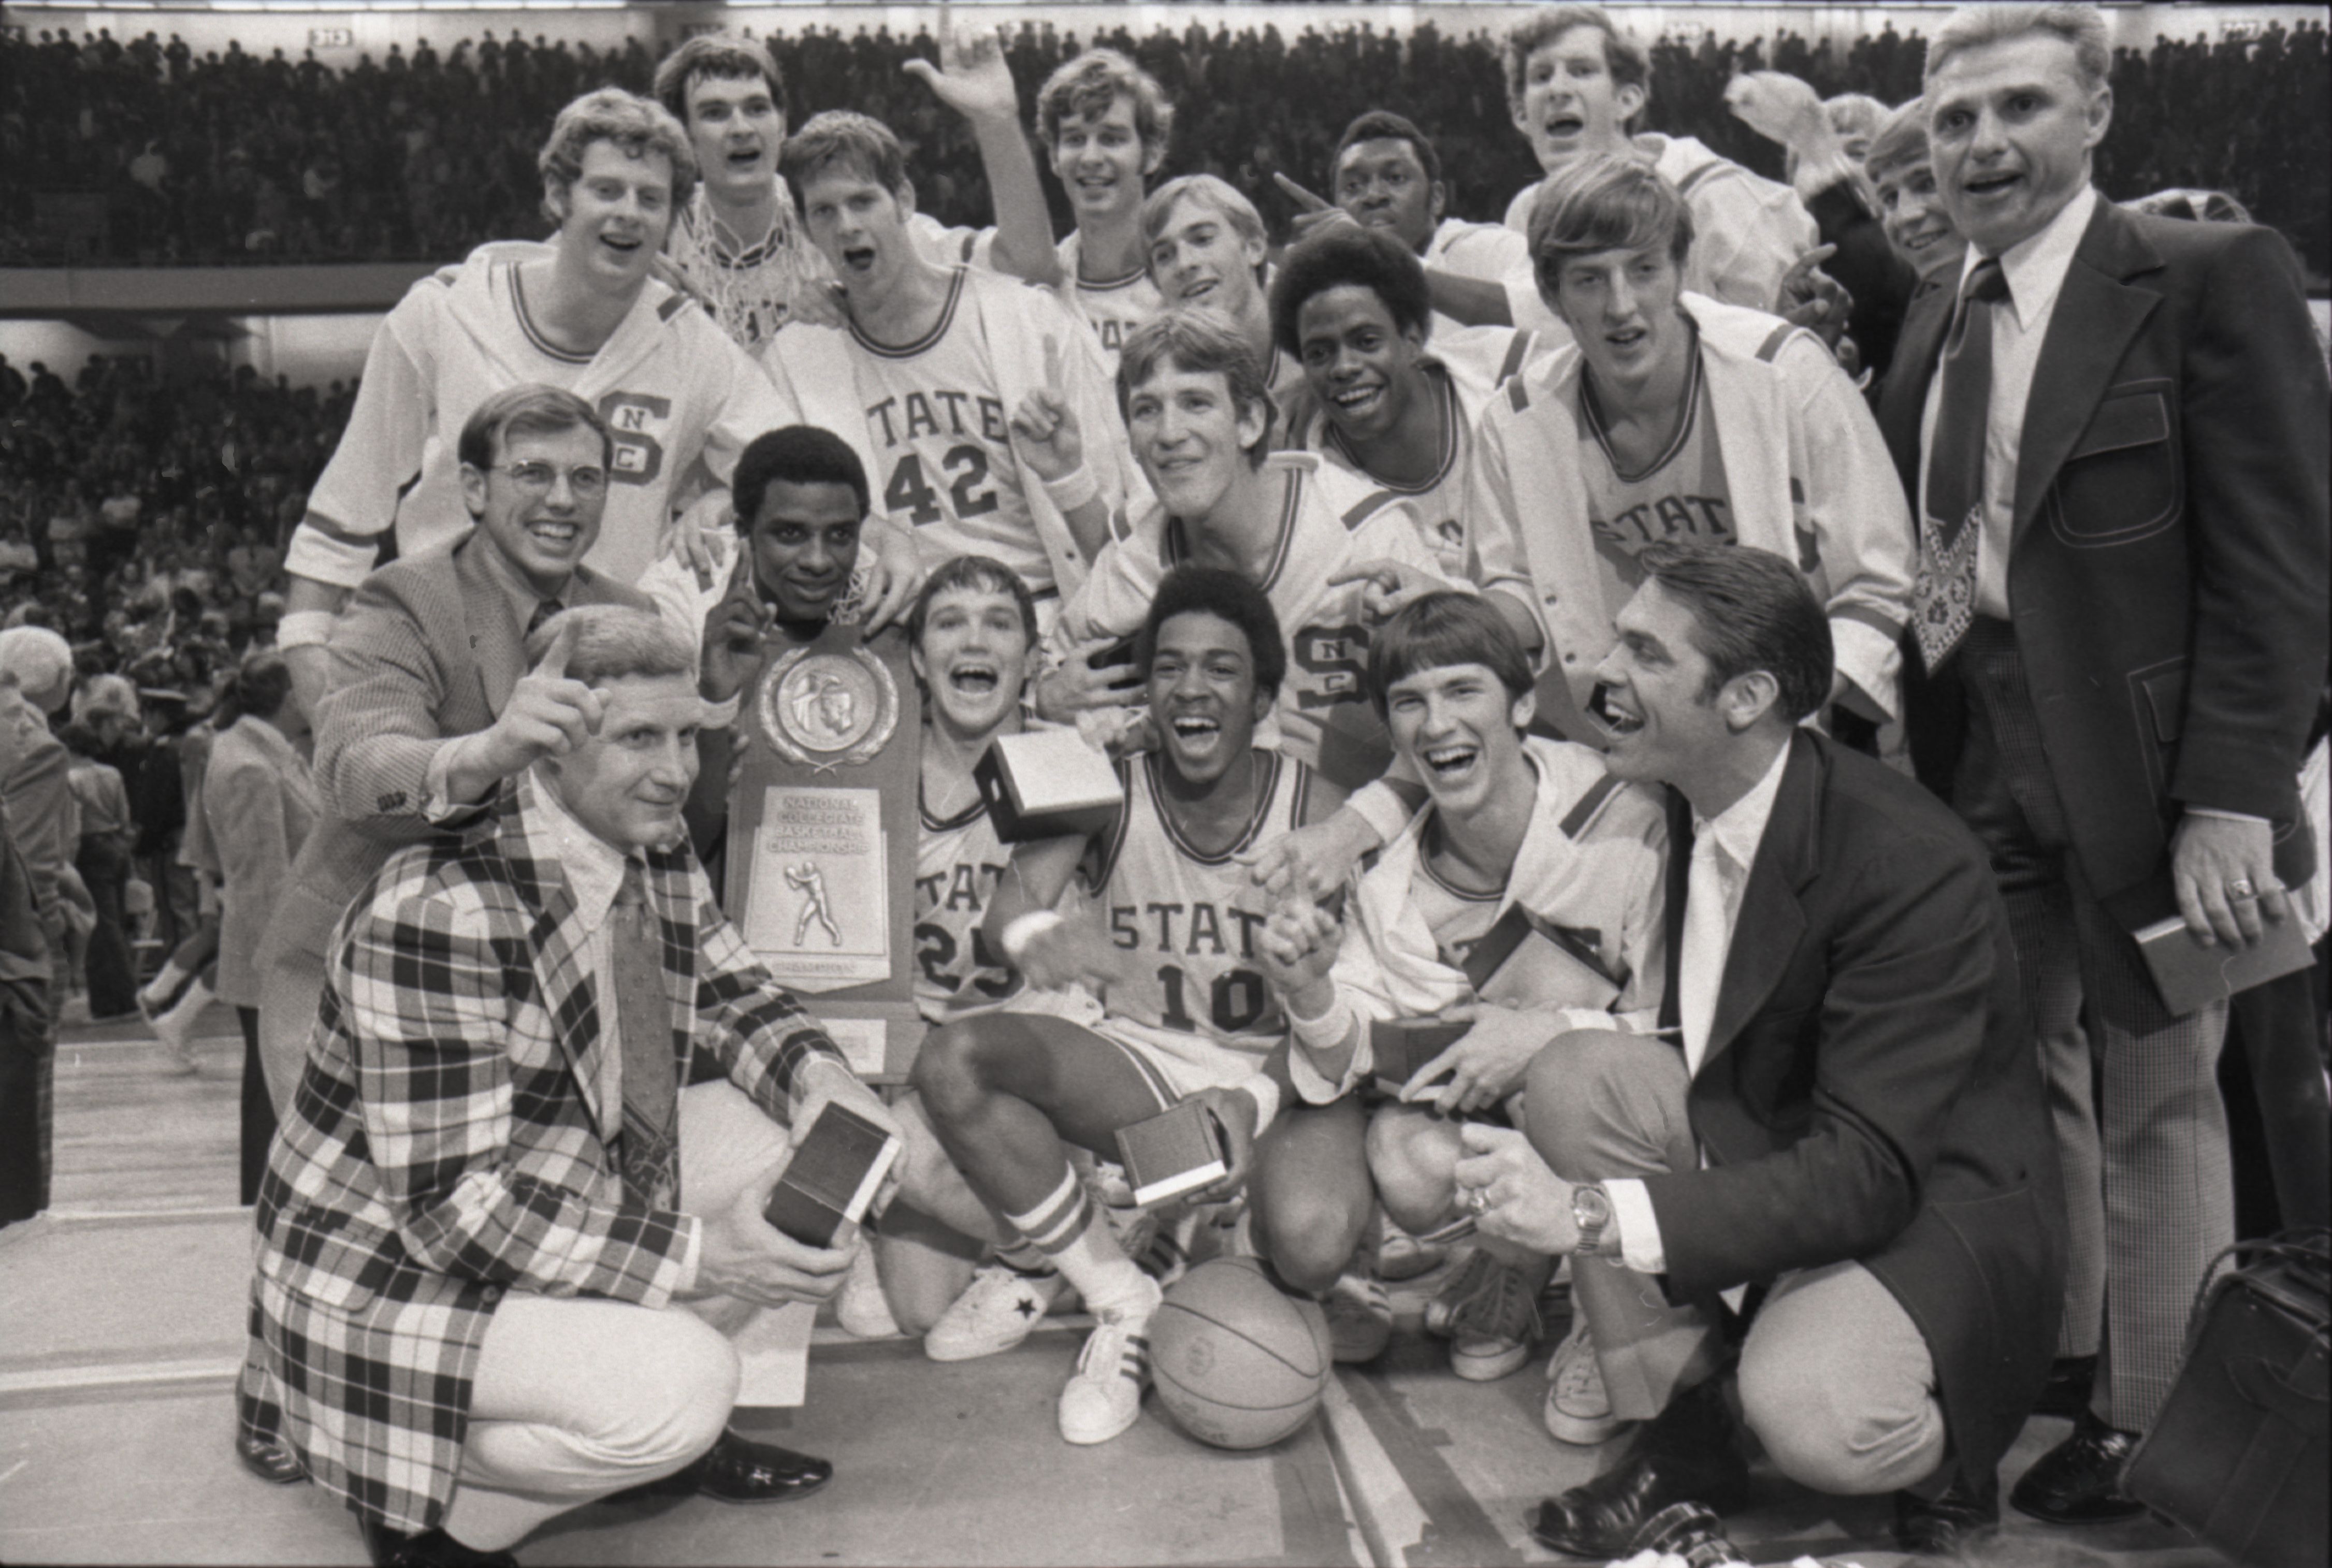 Team photo after winning the 1974 NCAA title